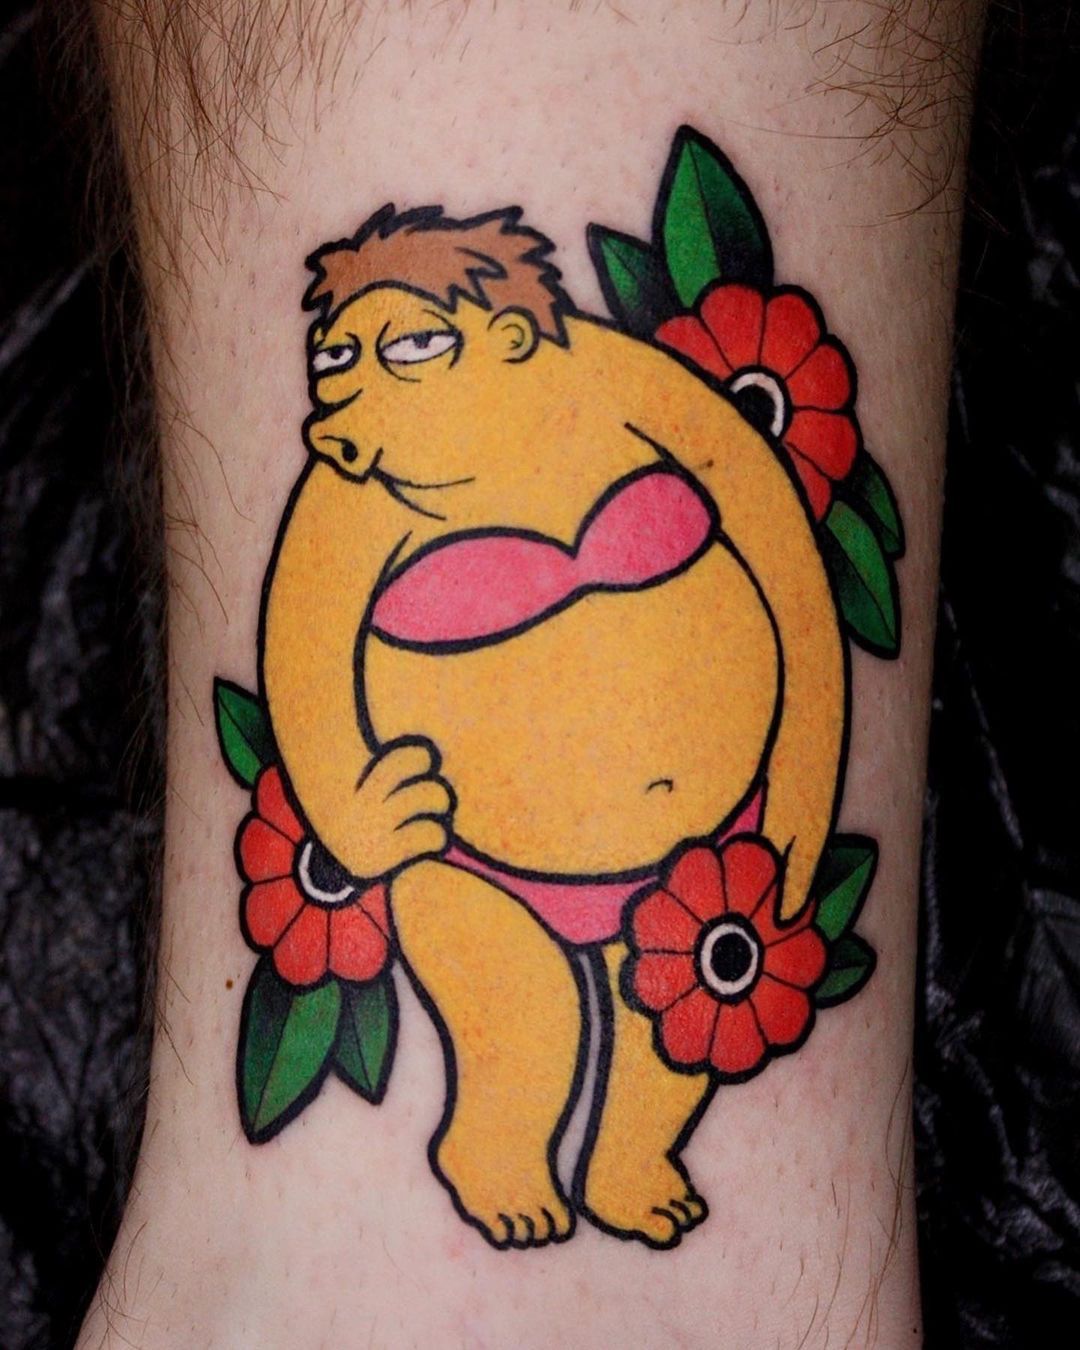 Barney lady - tattoo based on The Simpsons